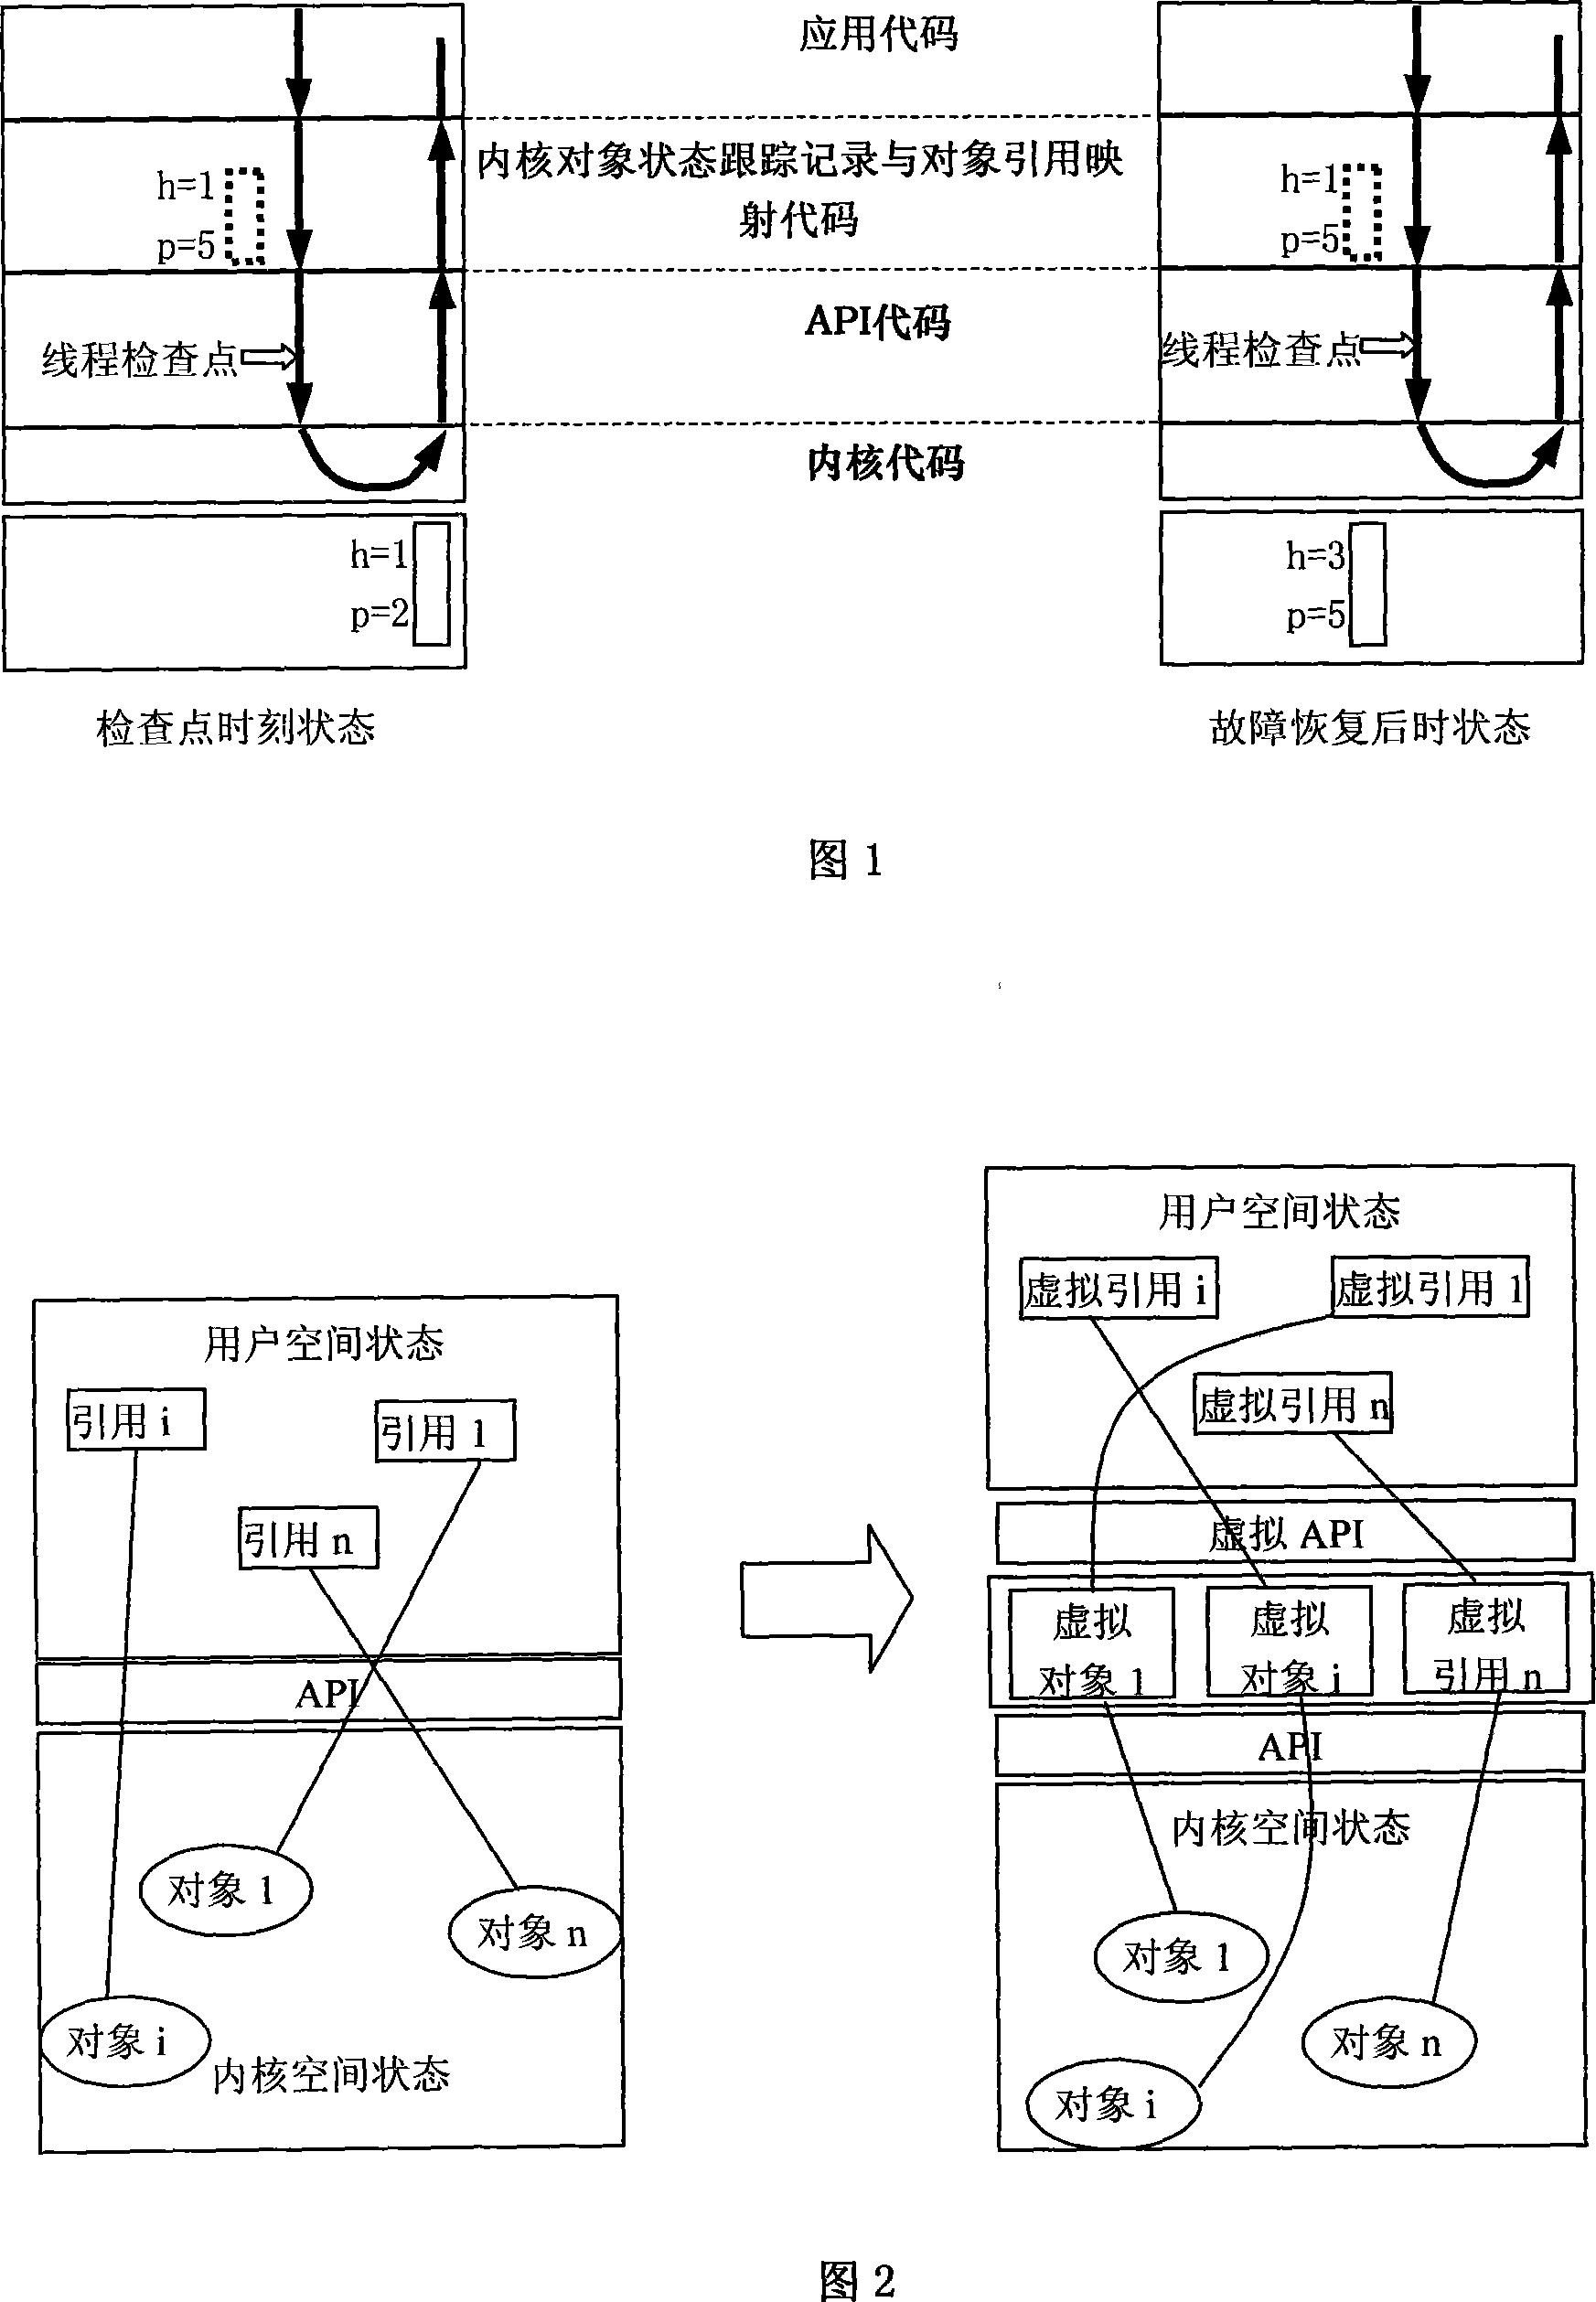 Method for implementing checkpoint of Linux program at user level based on virtual kernel object